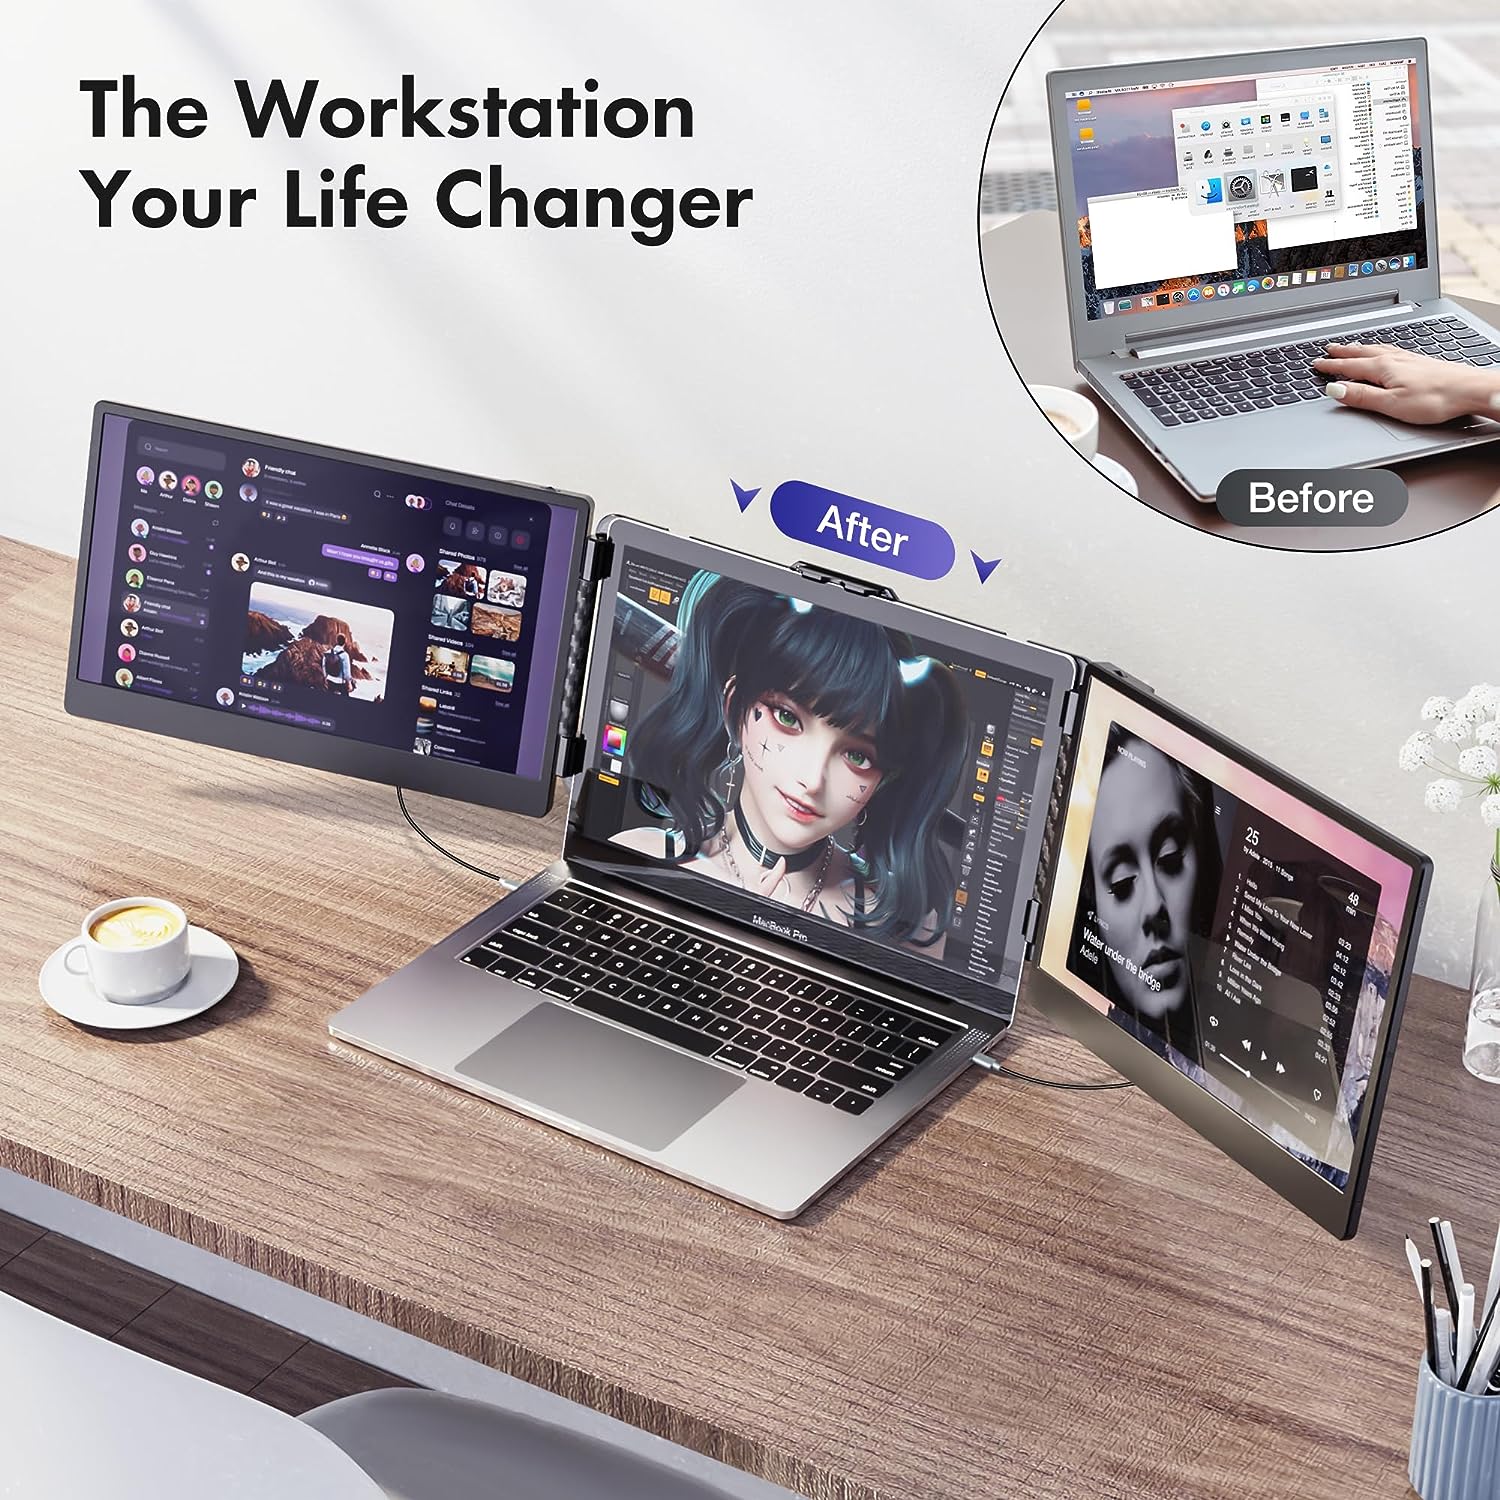 Kwumsy S2 14" Triple Laptop Screen Extender